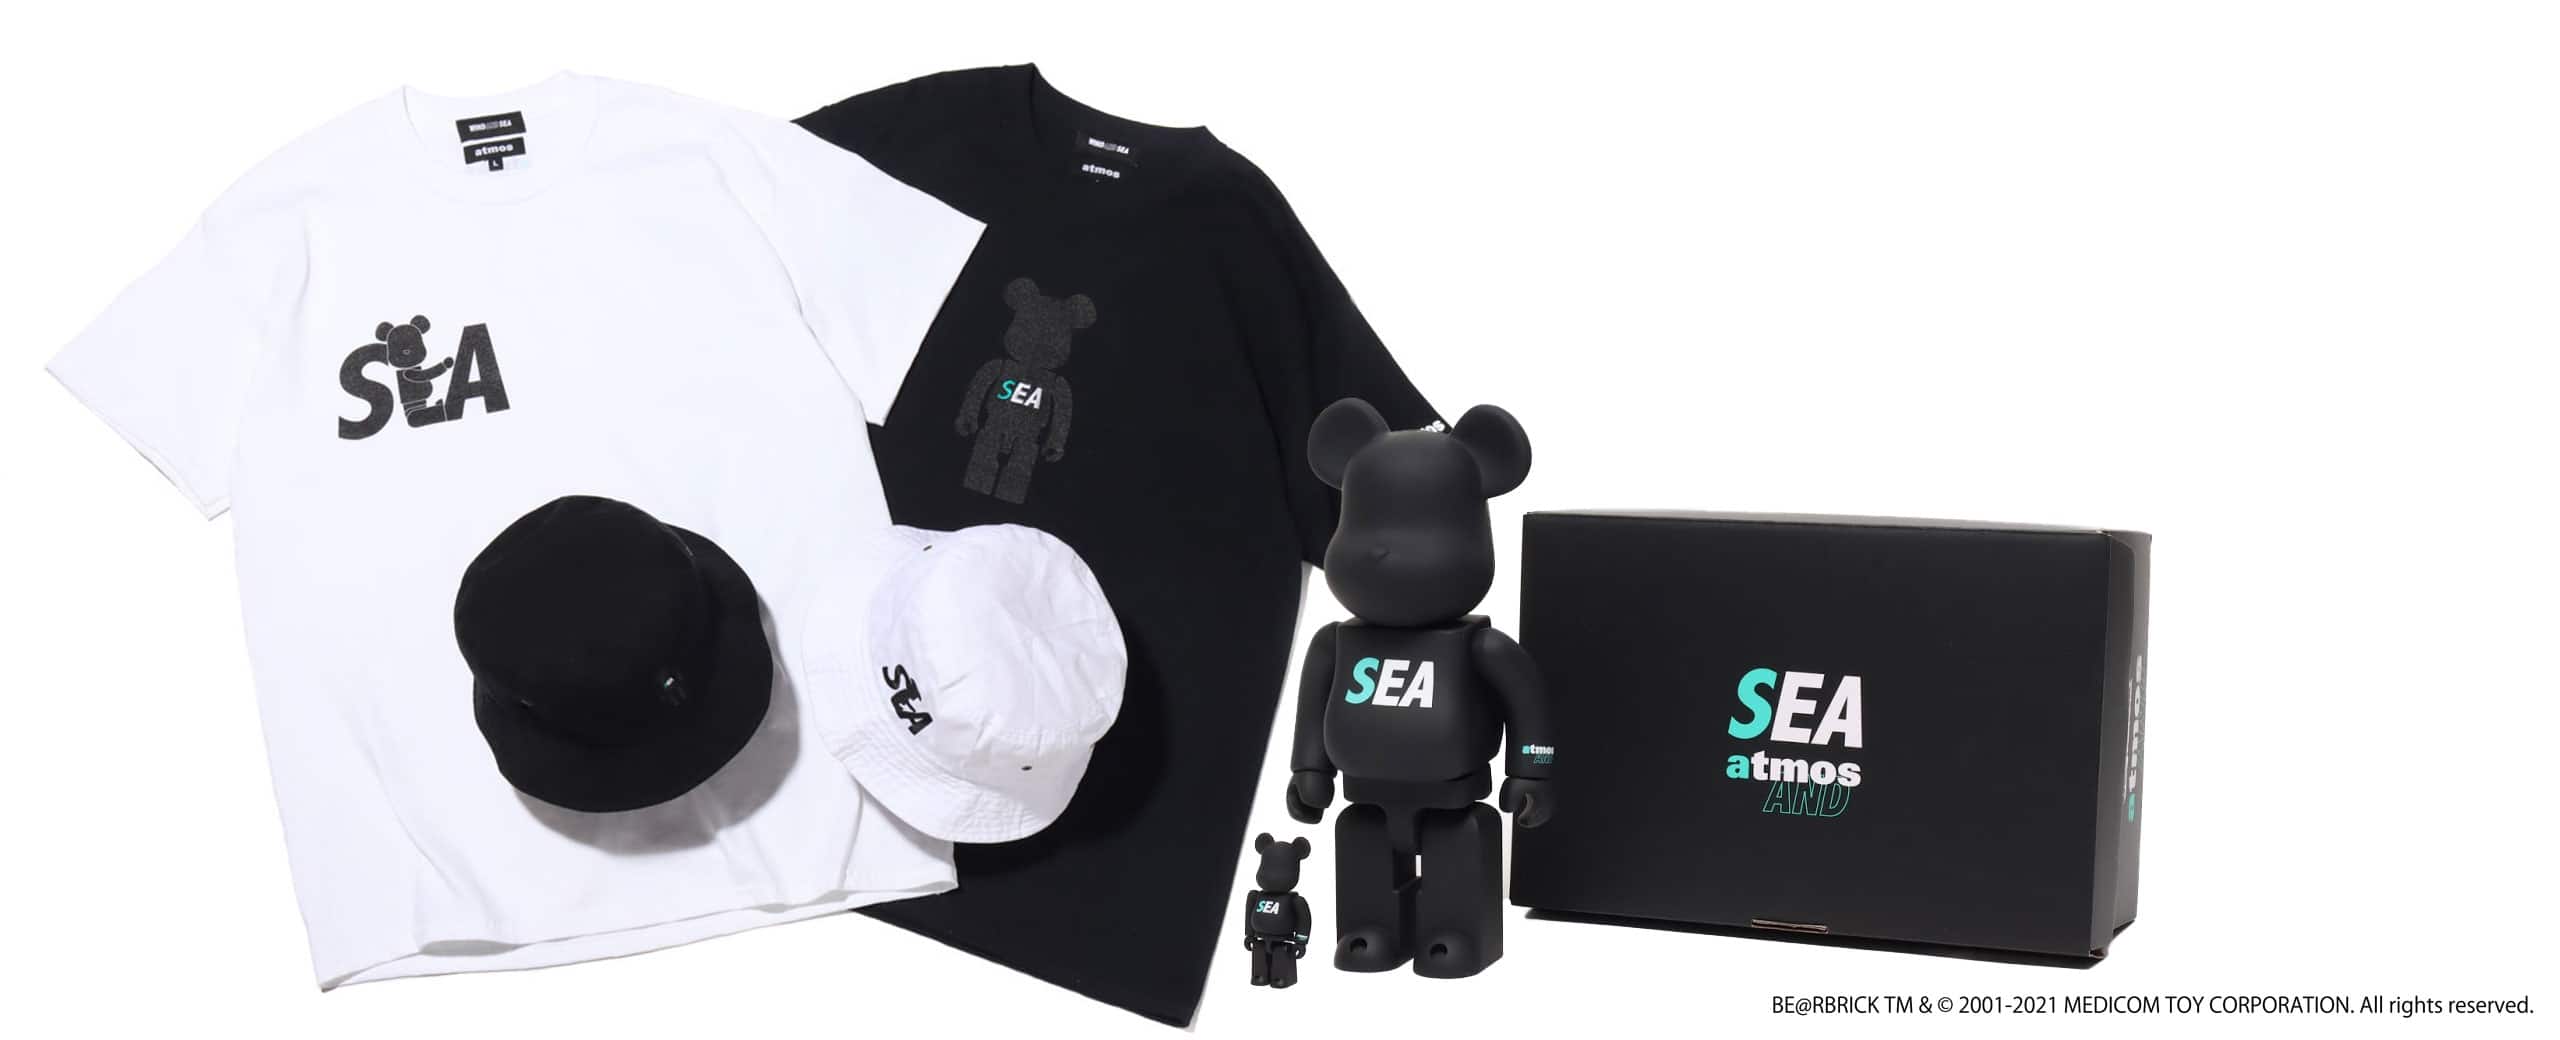 BE@RBRICK x atmos x WIND AND SEA Tシャツ L